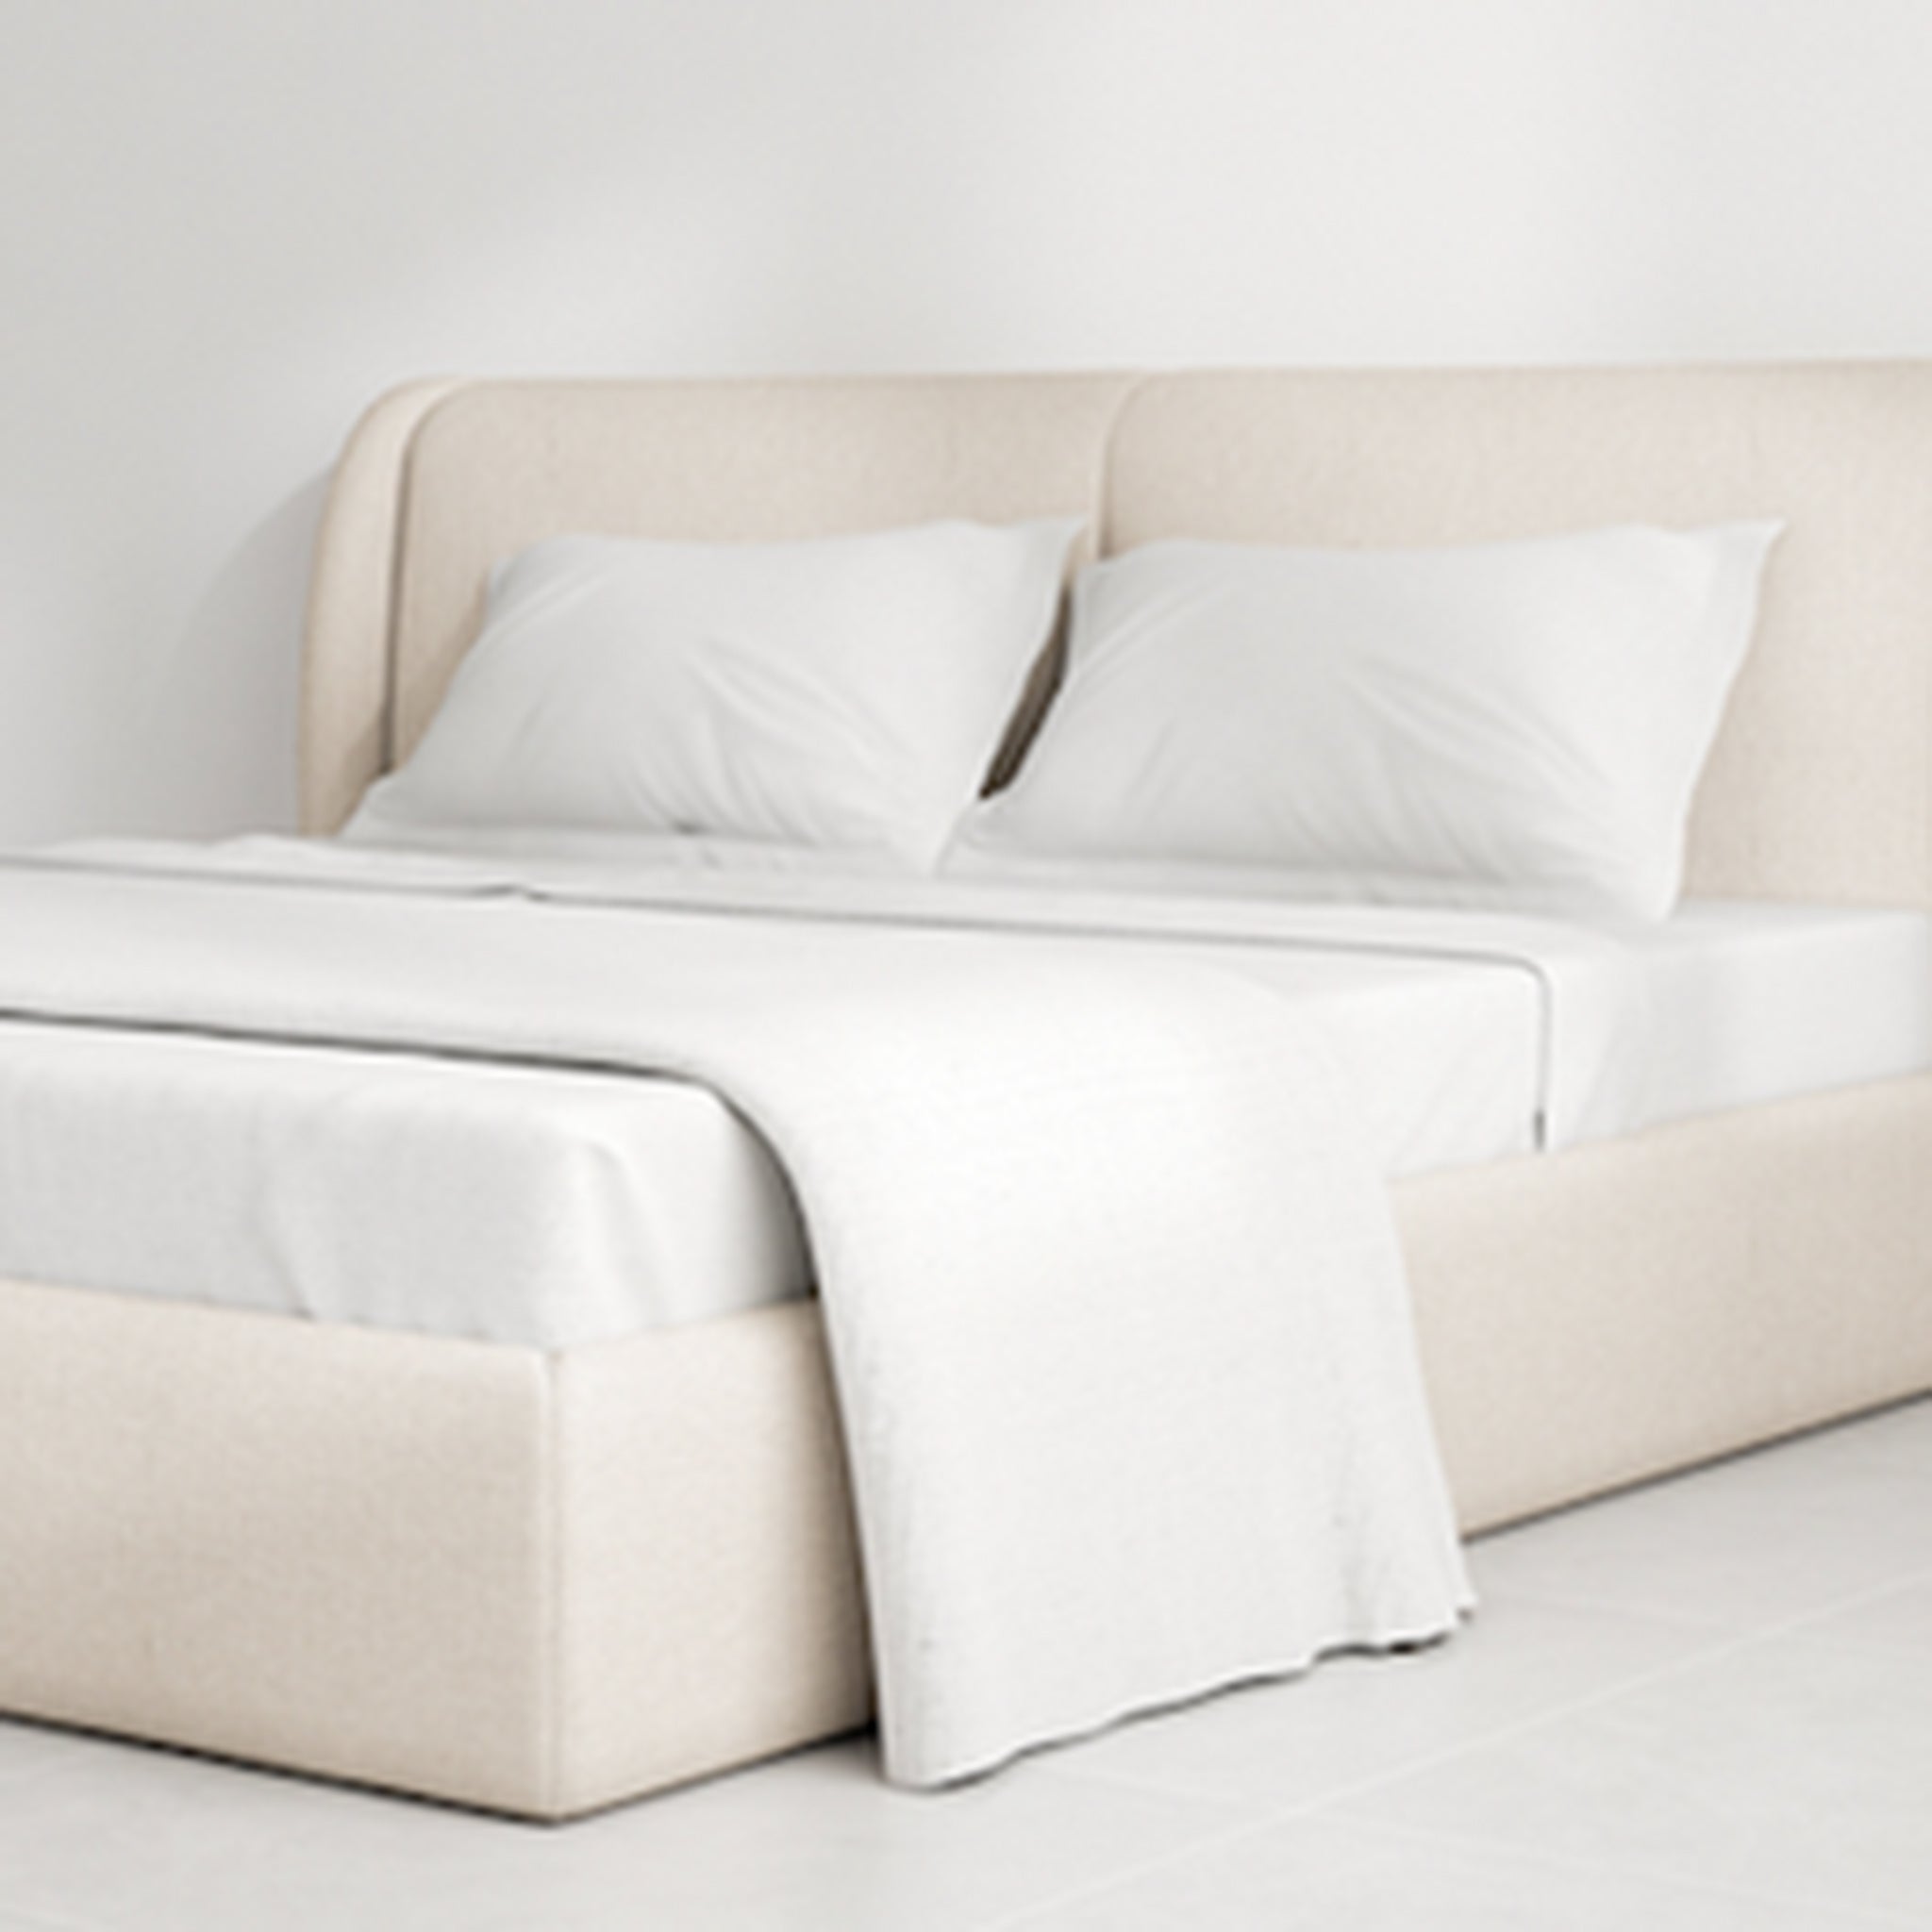 The Ashley Bed - Sophisticated 1970s Italian Design Inspired Bed